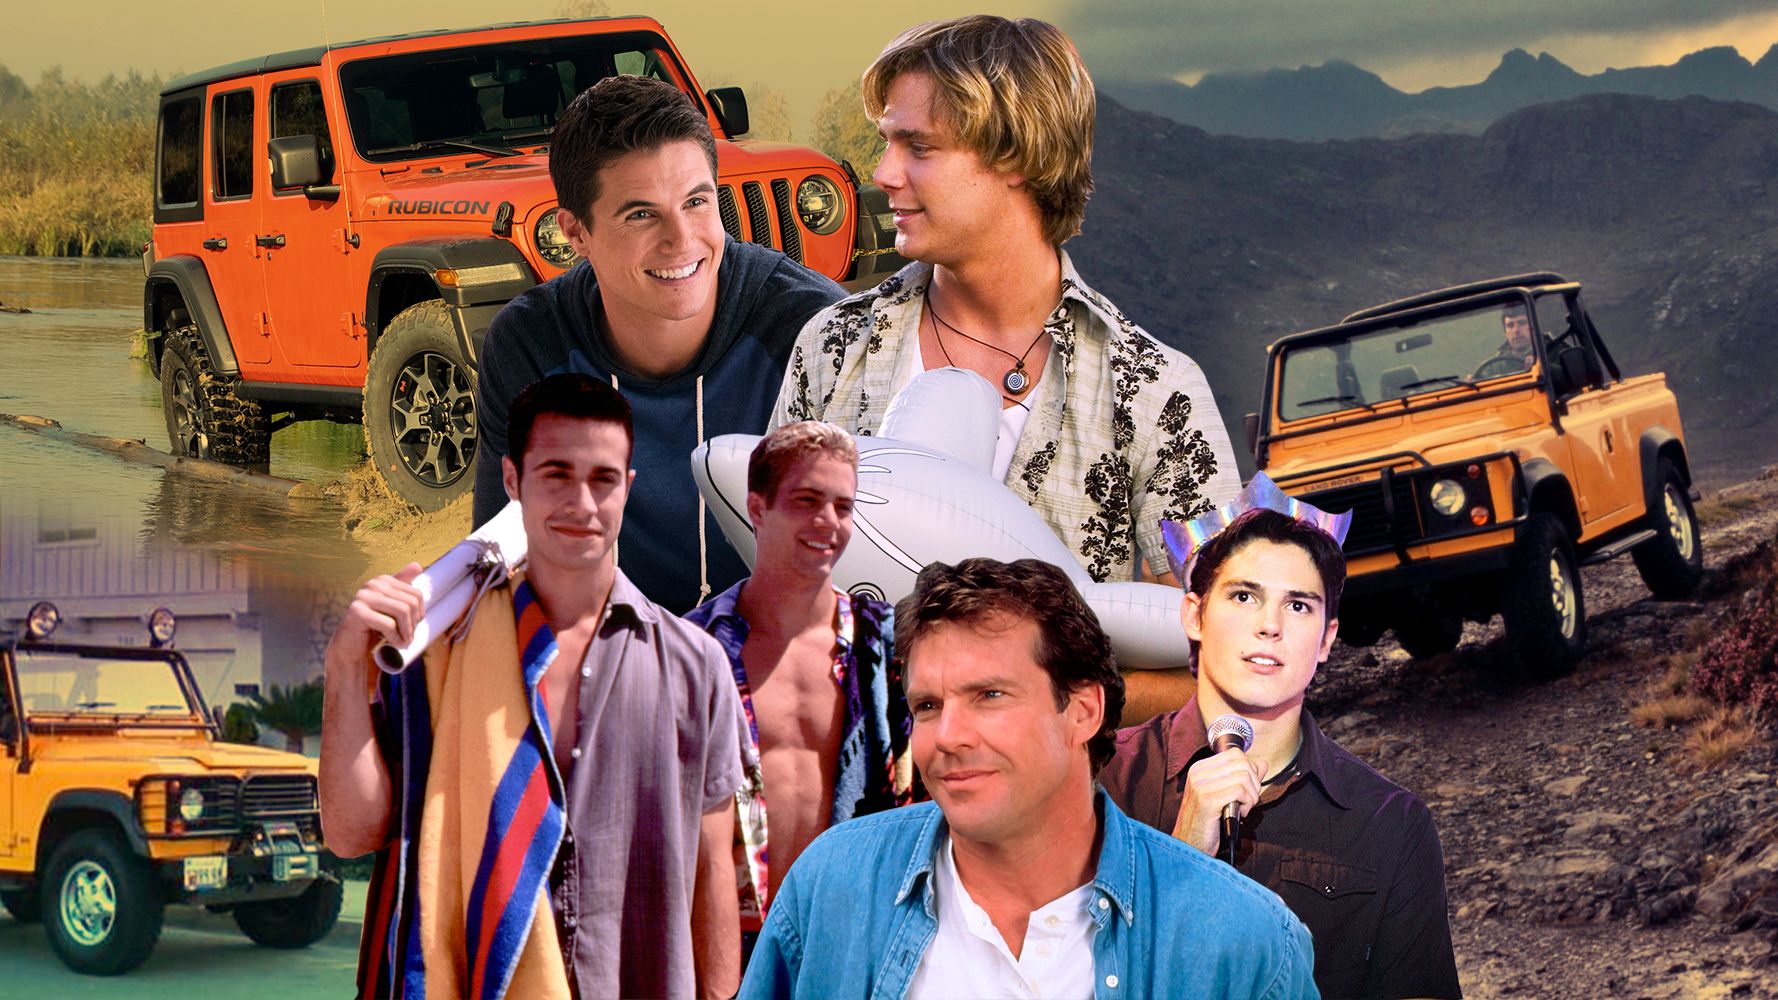 Jeeps and Hot People In Movies: What's Up With That? | Marie Claire